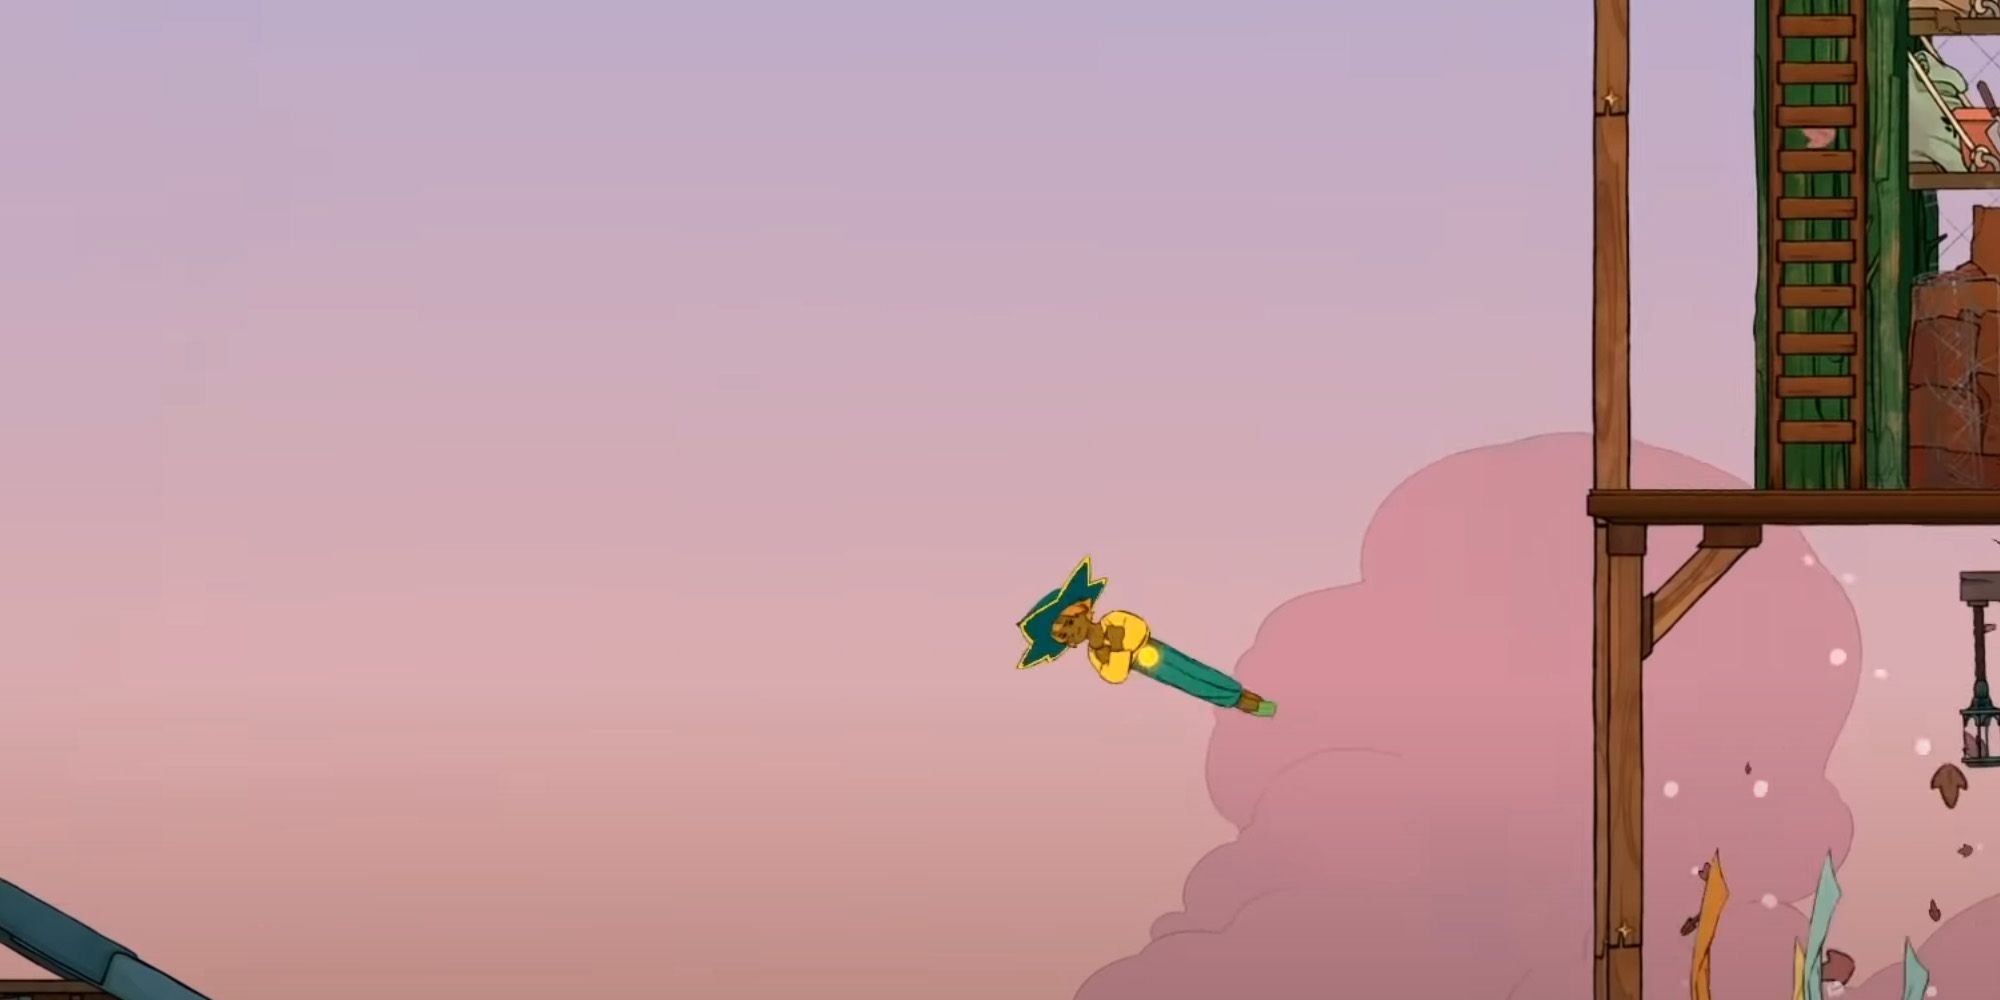 Stella mid-jump in front of a pink sky in Spiritfarer